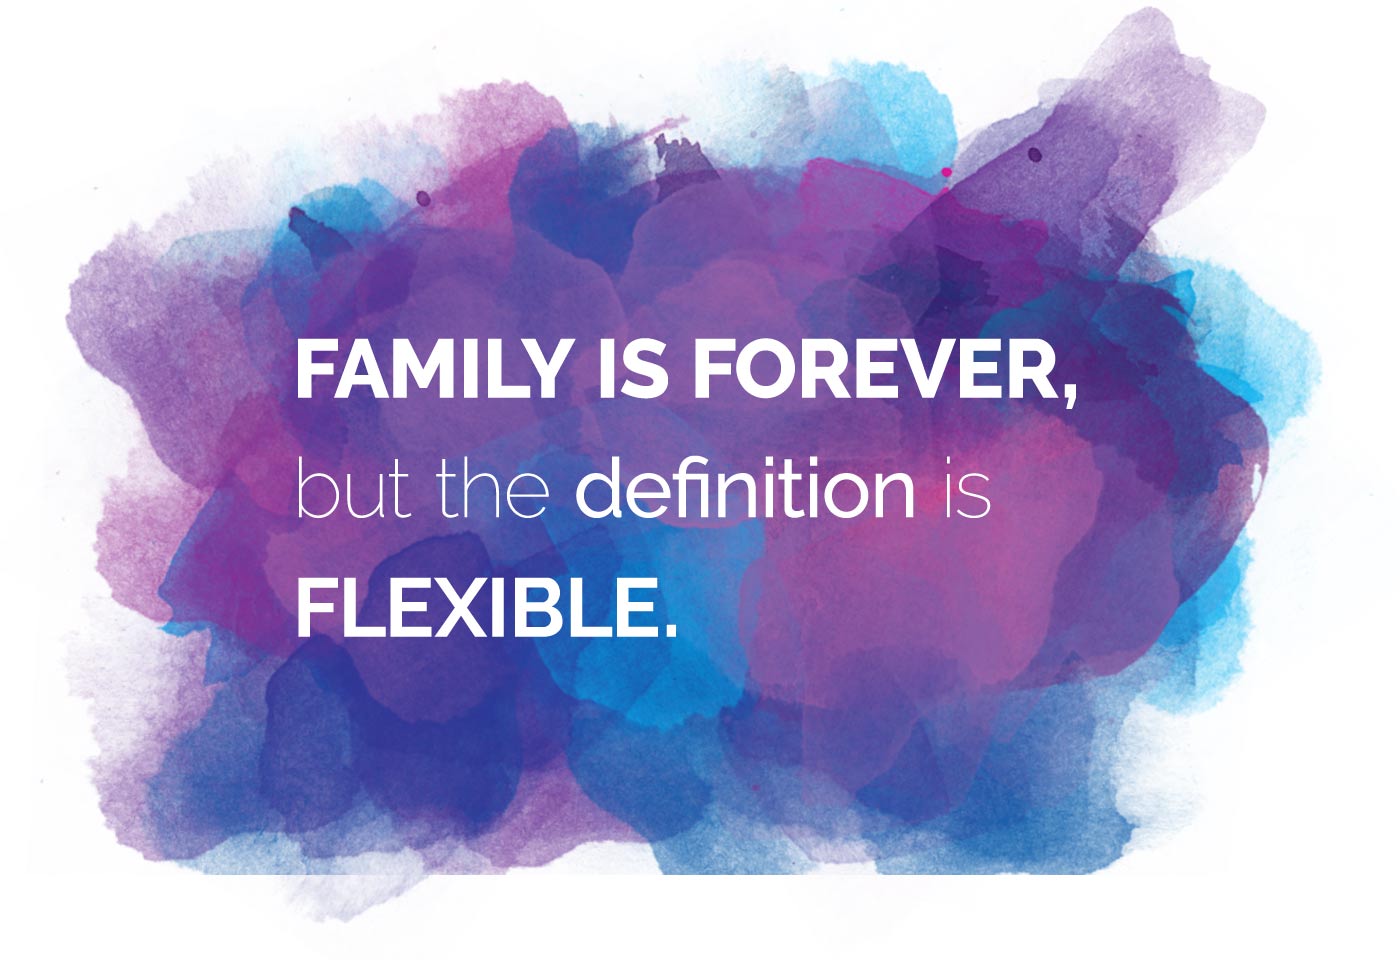 Family is forever, but the definition is flexible